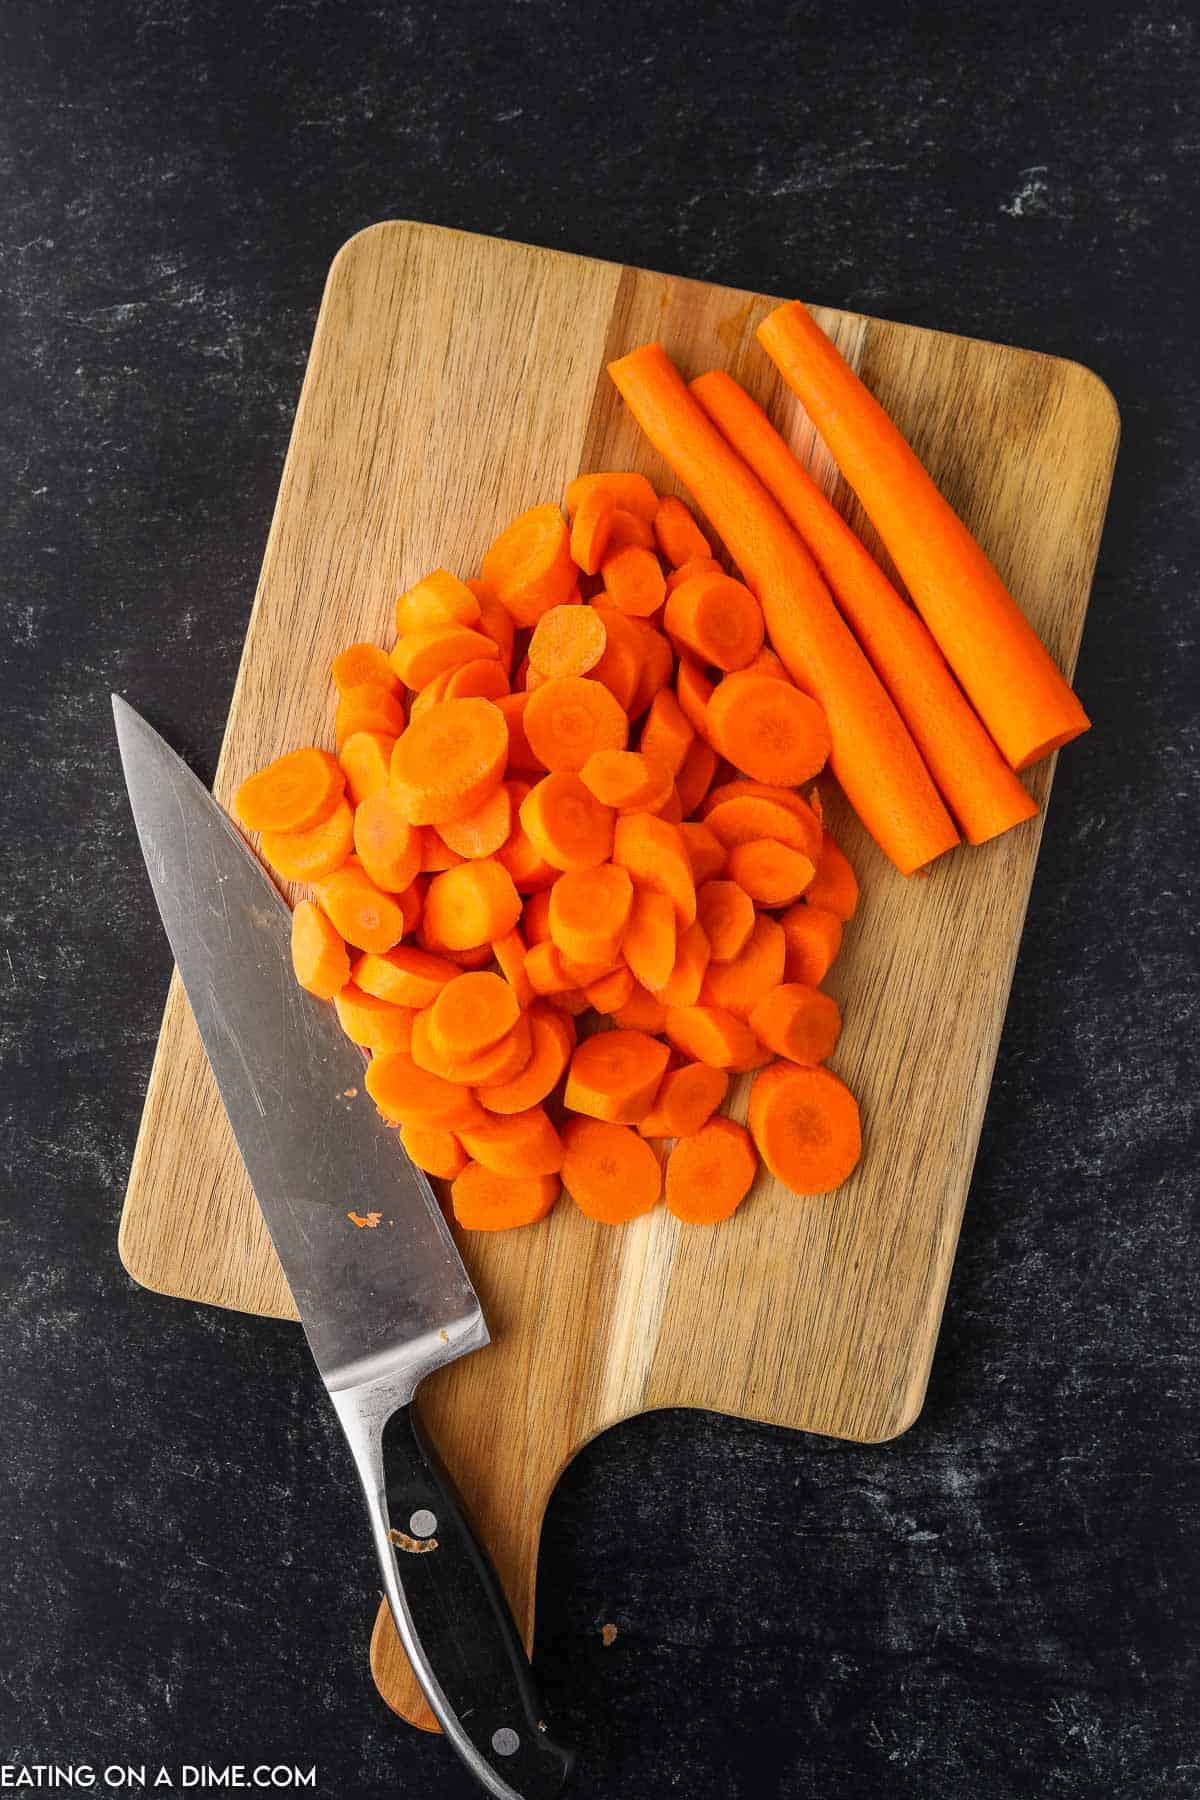 Trim and cut carrots on a cutting board with knife